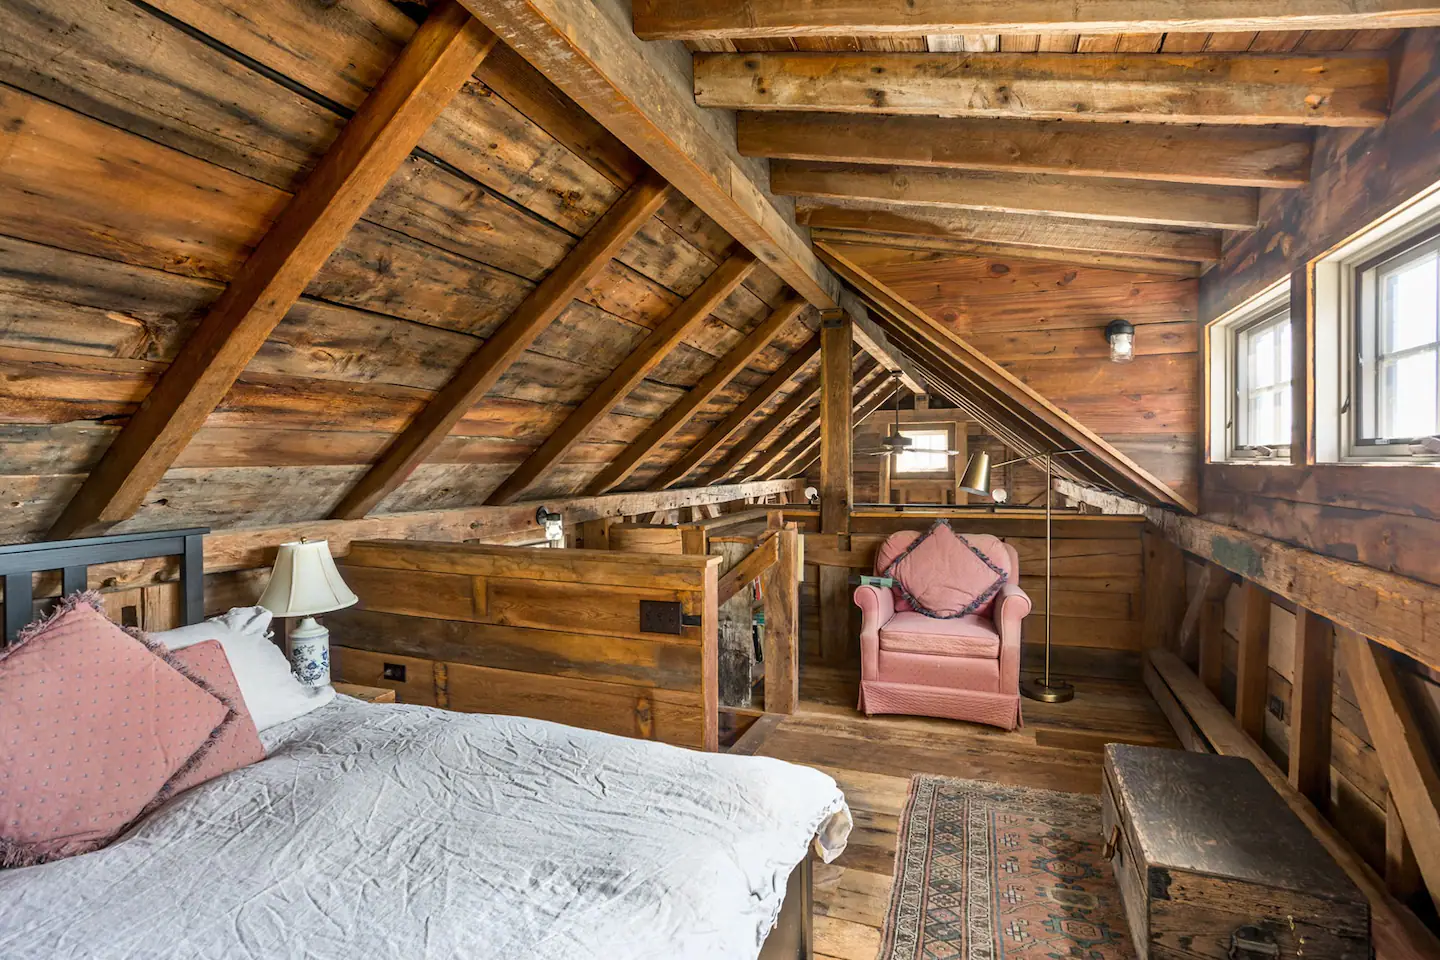 The bedroom loft of the annex includes a queen size bed and attached half-bath.